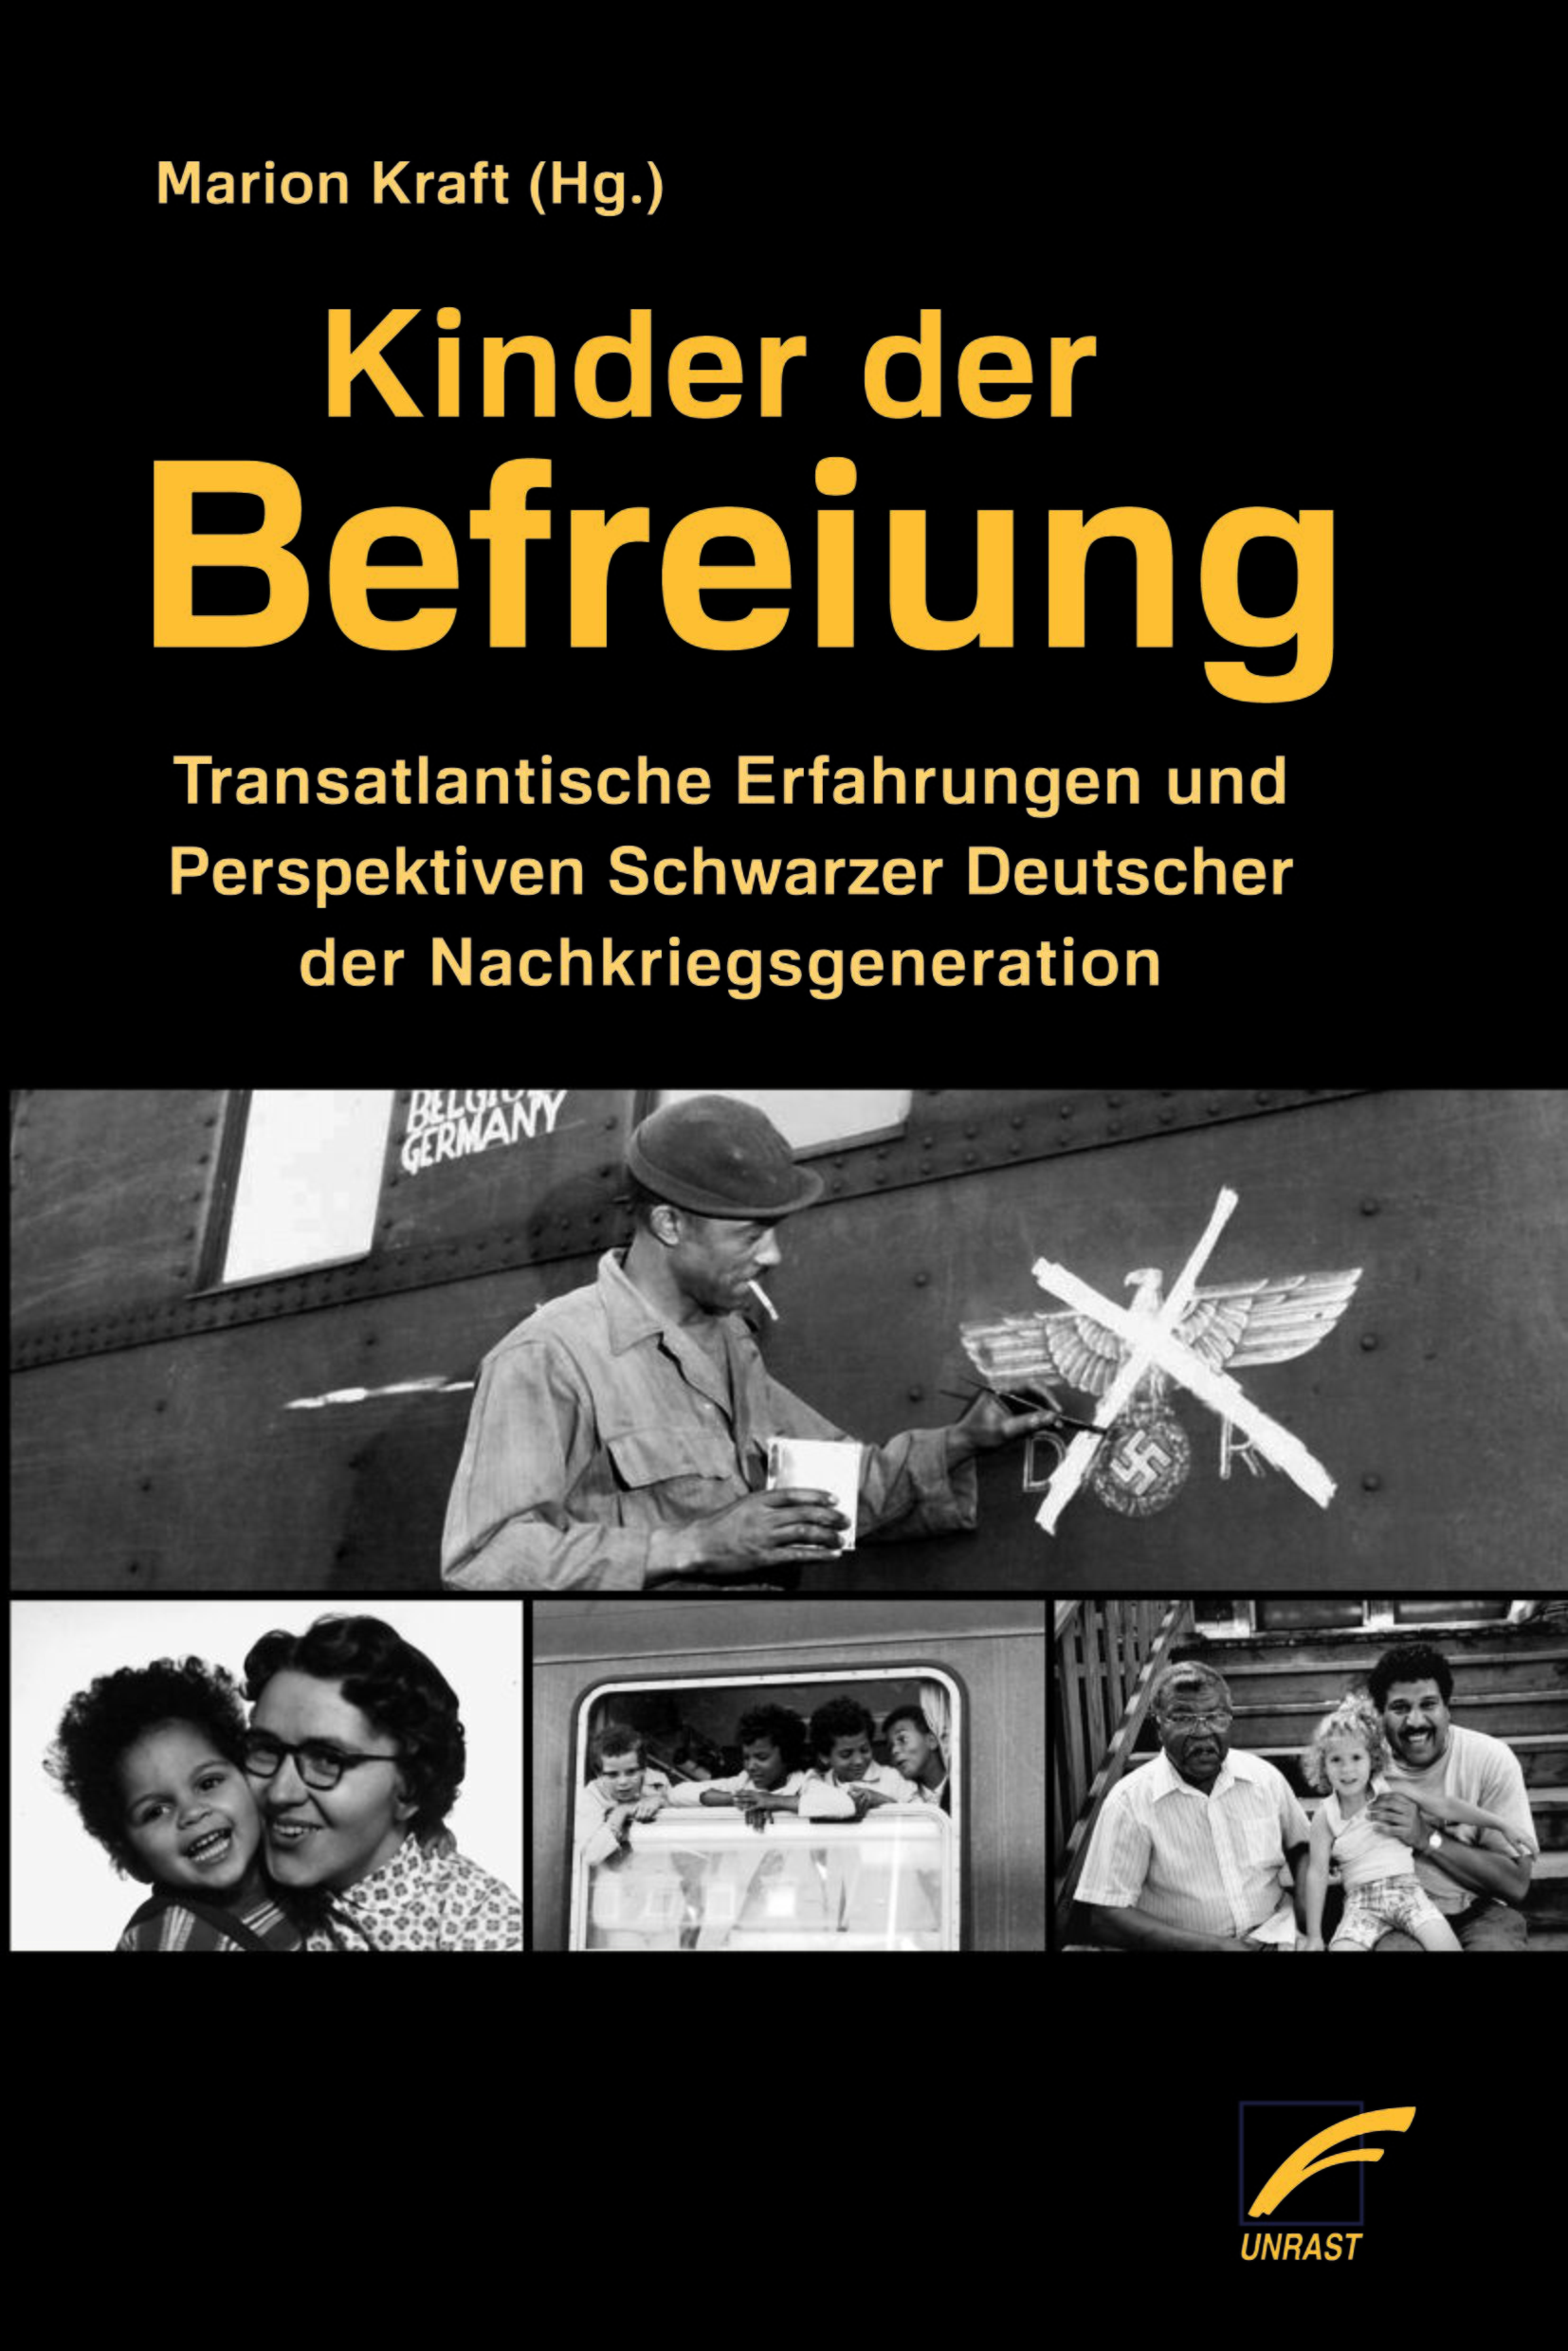 In the “Kinder der Befreiung” (Children of the Liberation) anthology published by Marion Kraft, those affected report on their lives and experiences in post-war Germany. 